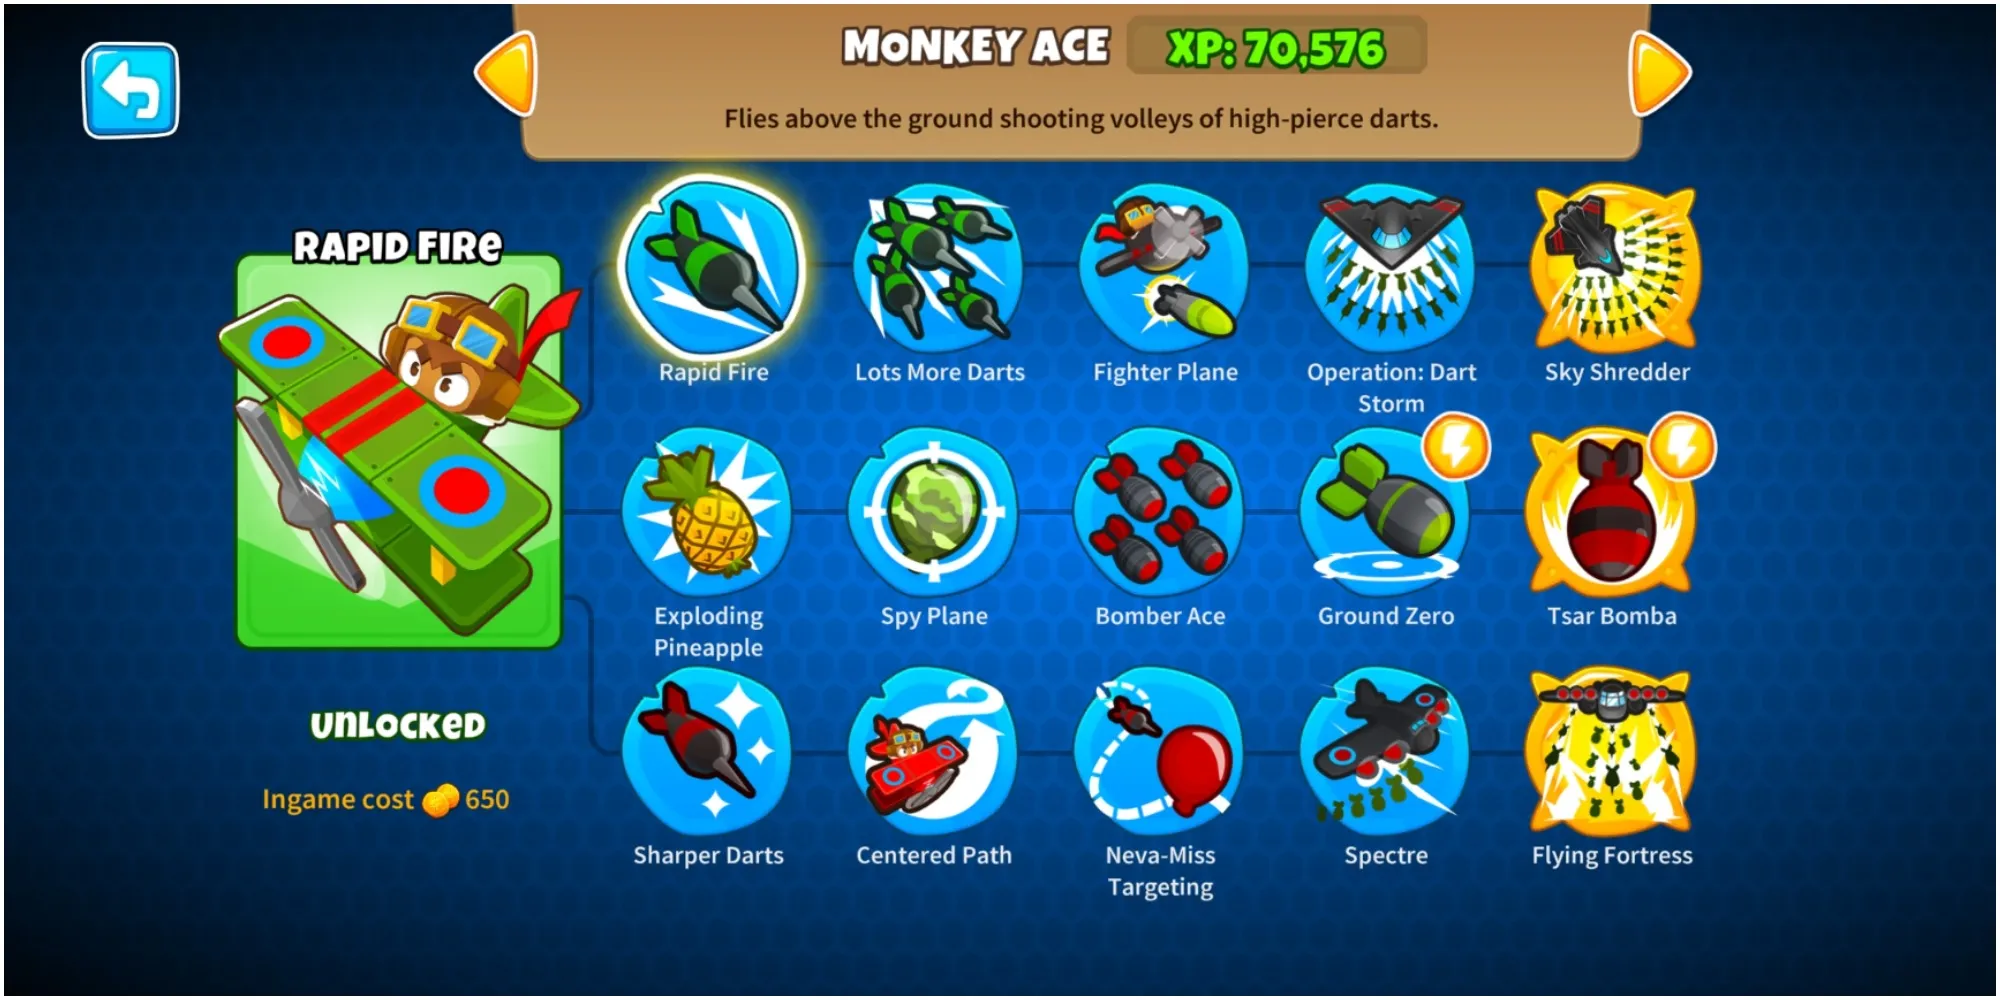 Bloons TD 6 Monkey Ace Paths